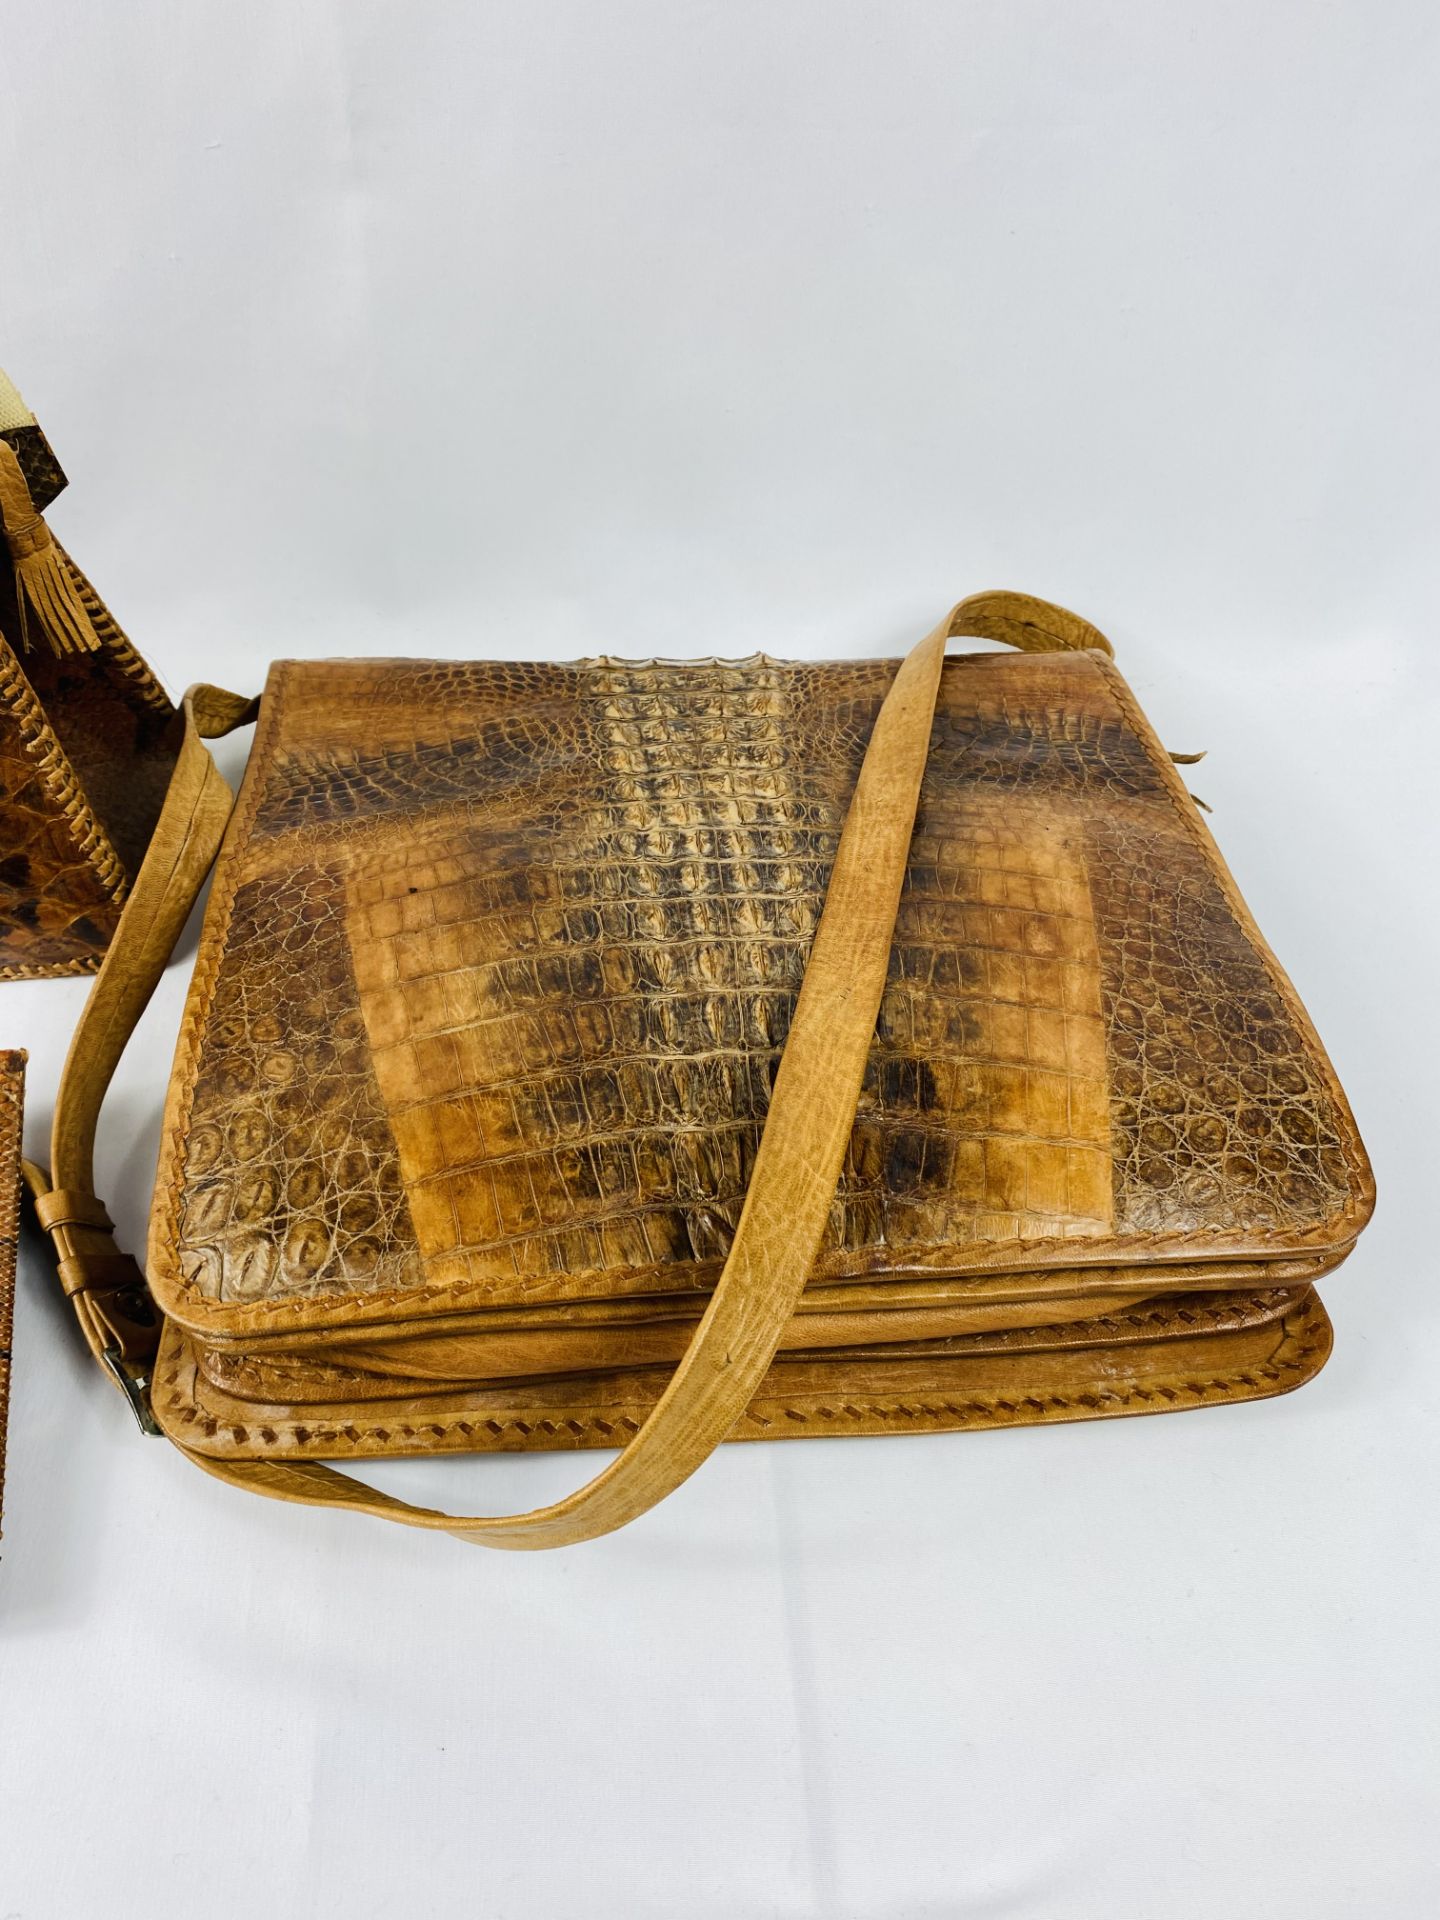 African crocodile handbag and other items. CITIES REGULATIONS APPLY TO THIS LOT. - Image 3 of 3